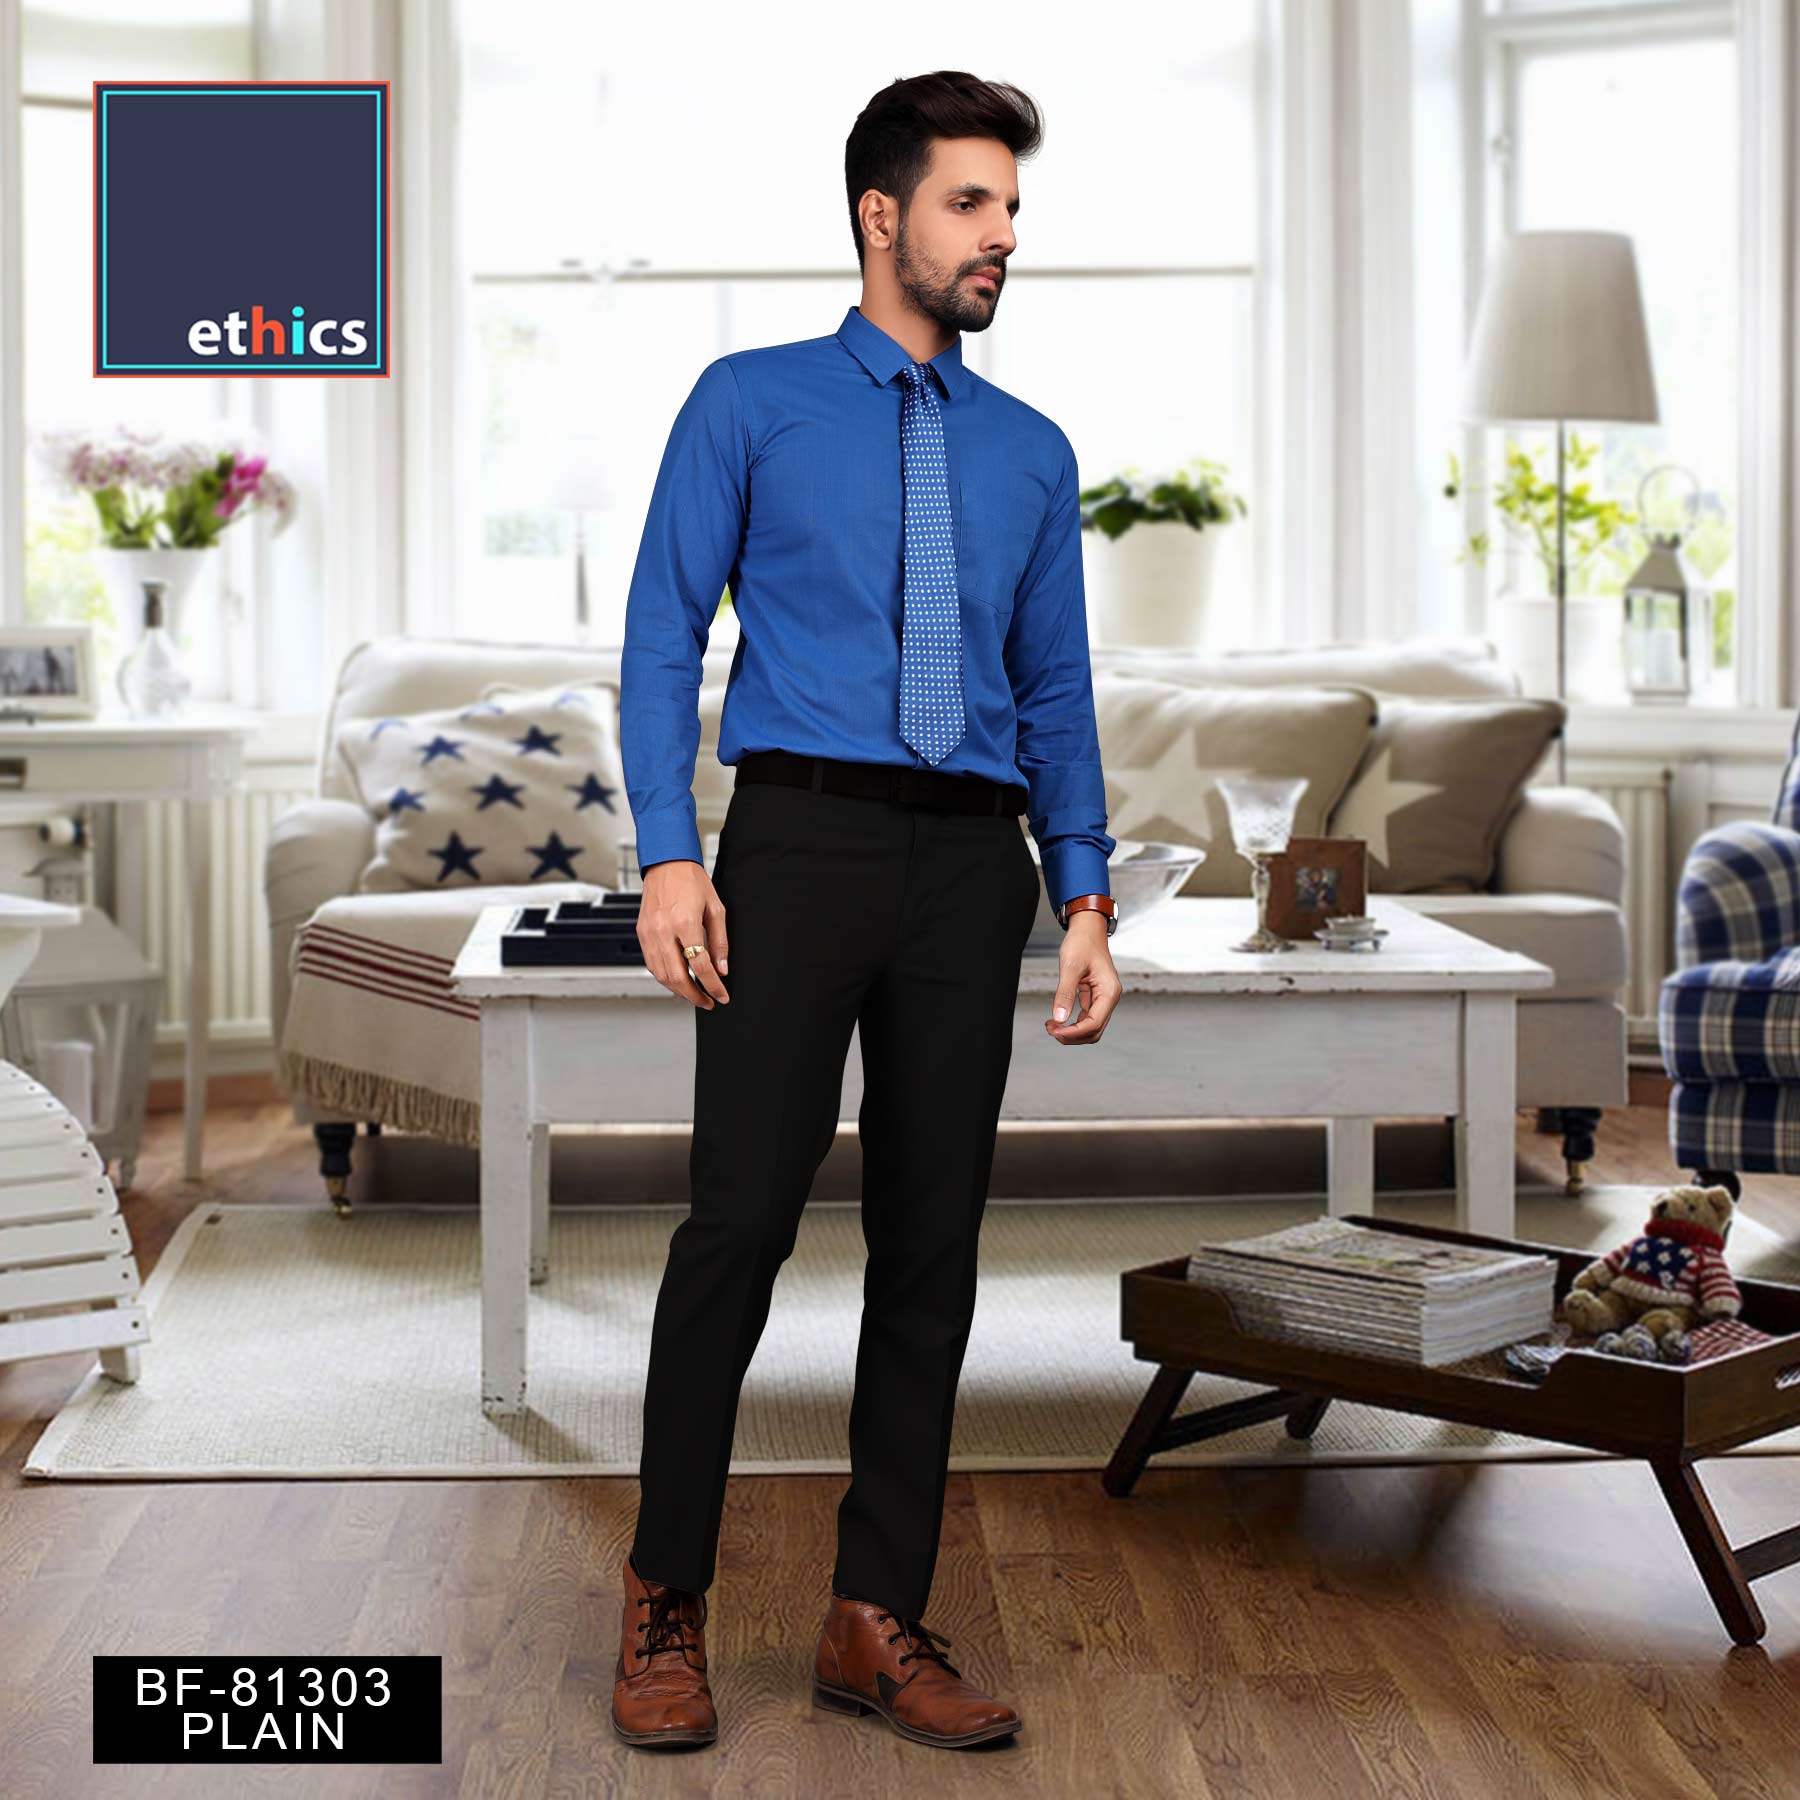 7 Shirt Colors To Wear With Blue Pants And Brown Shoes  Ready Sleek